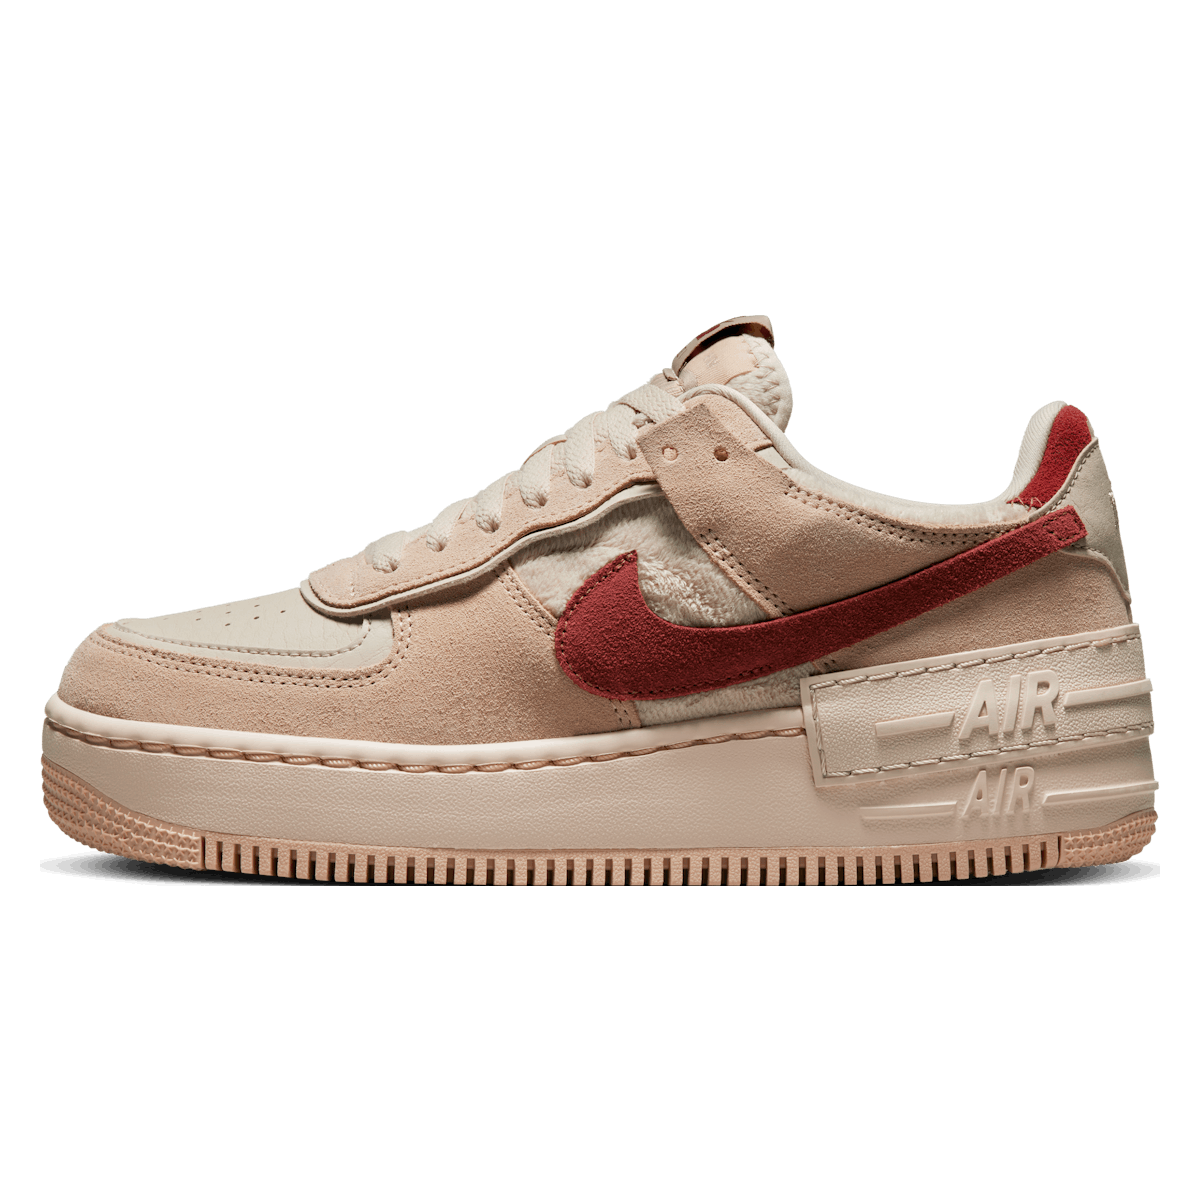 Nike Air Force 1 Shadow Wmns "Shimmer"